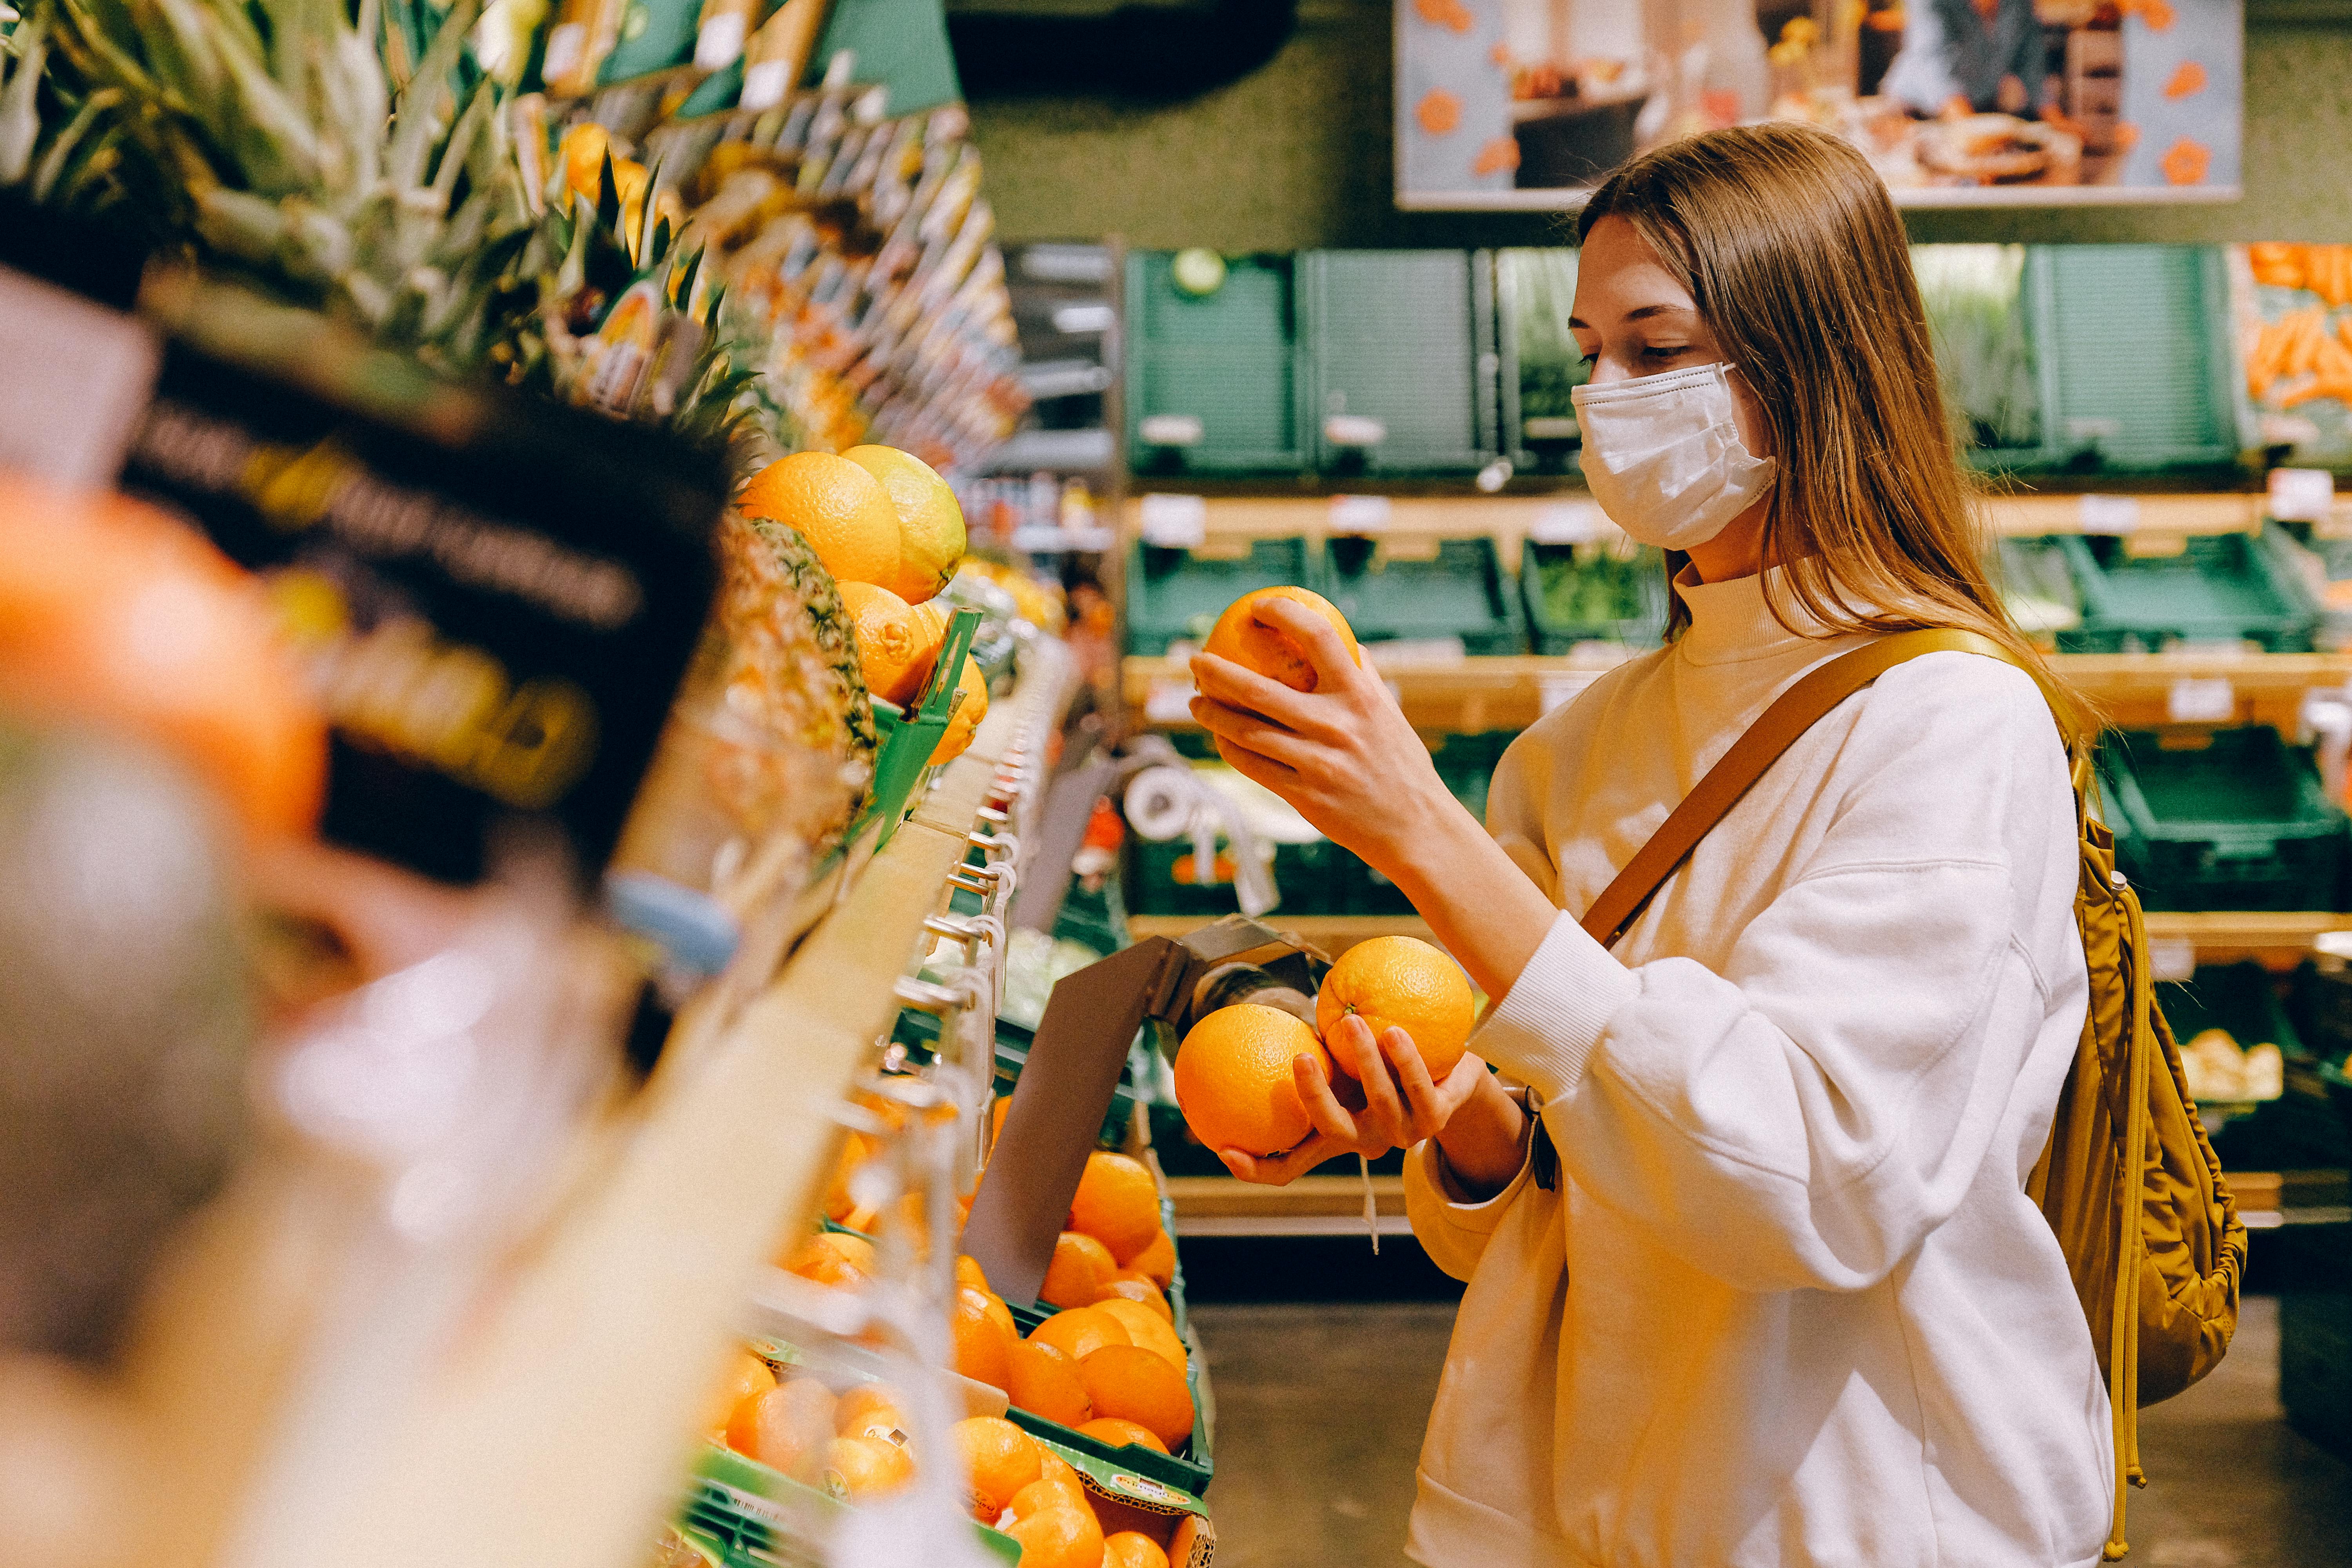 A woman grocery shopping | Source: Pexels